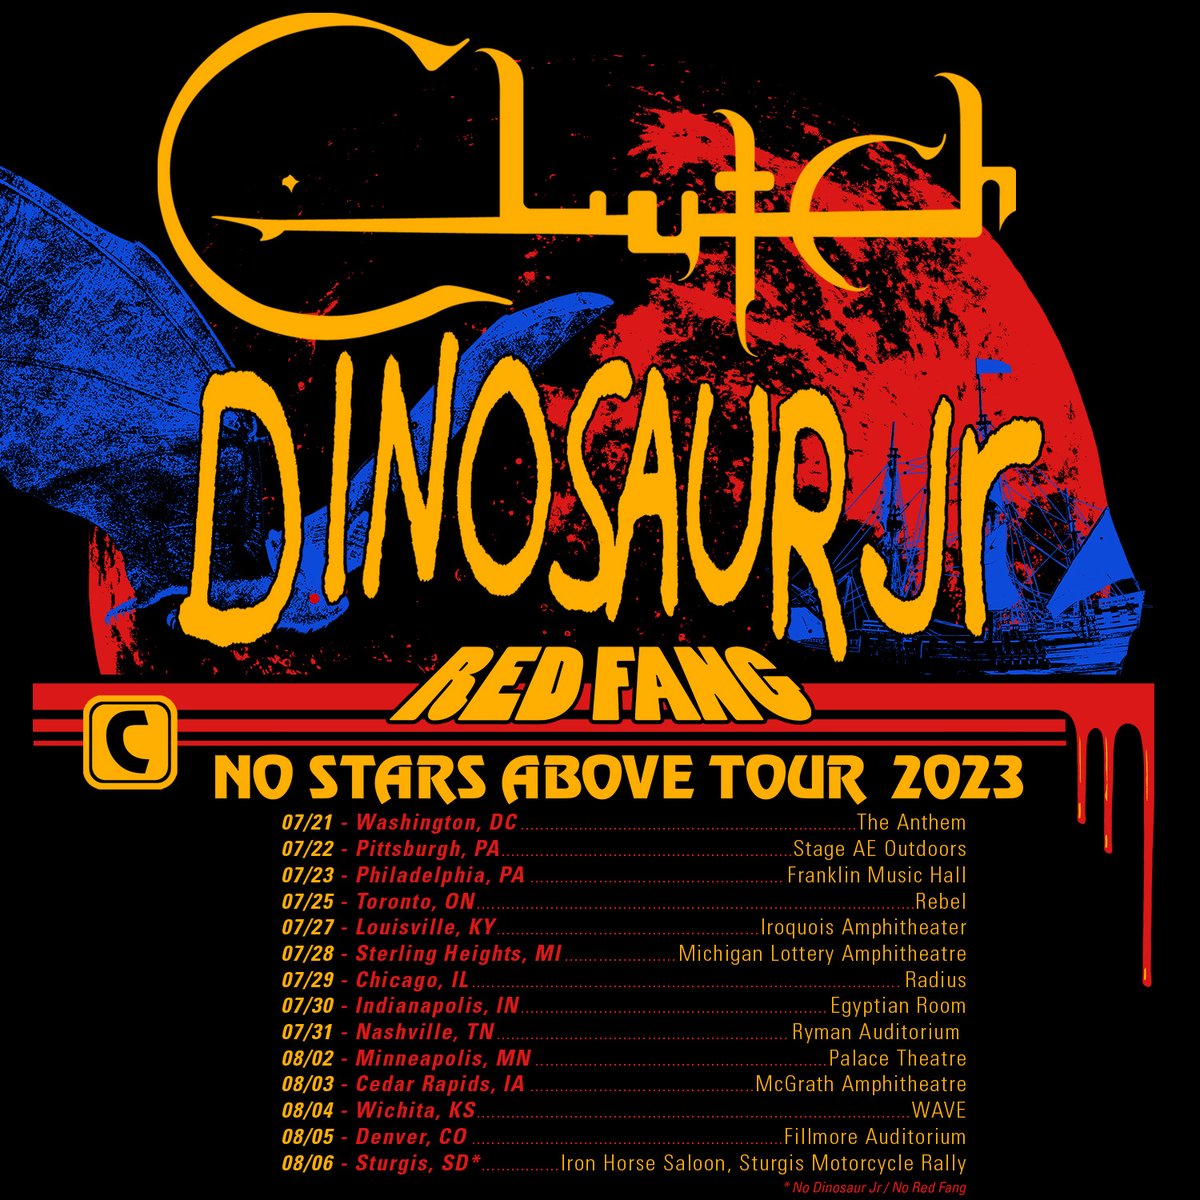 On tour this Summer with @clutchofficial & @dinosaurjr! Tickets on sale Friday @ 10am local time. redfang.net/live.html